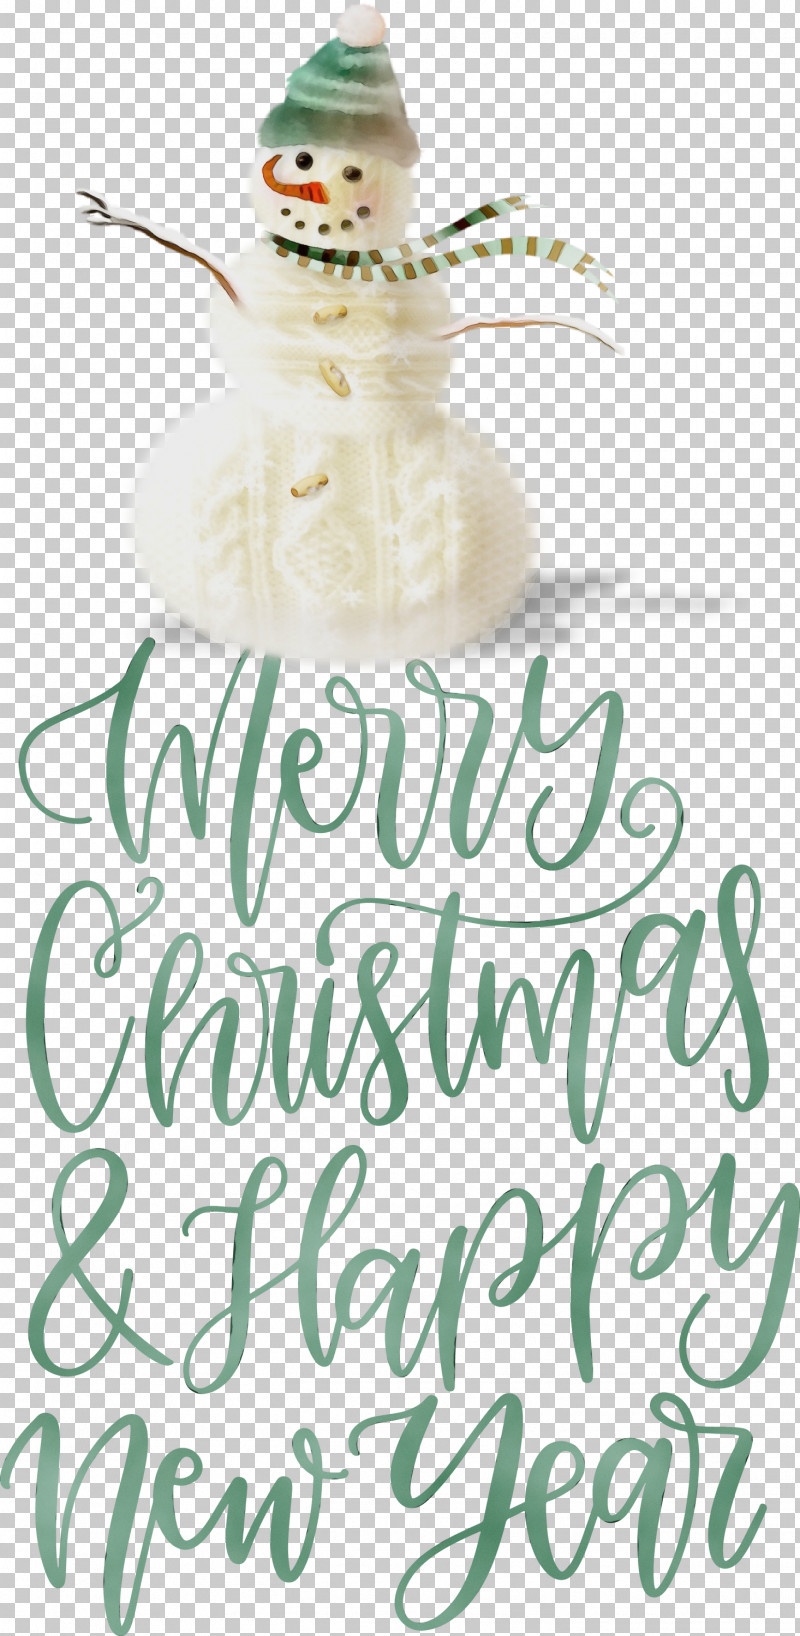 Font Calligraphy Tree Happiness Character PNG, Clipart, Calligraphy, Character, Christmas Snow Background, Happiness, Meter Free PNG Download